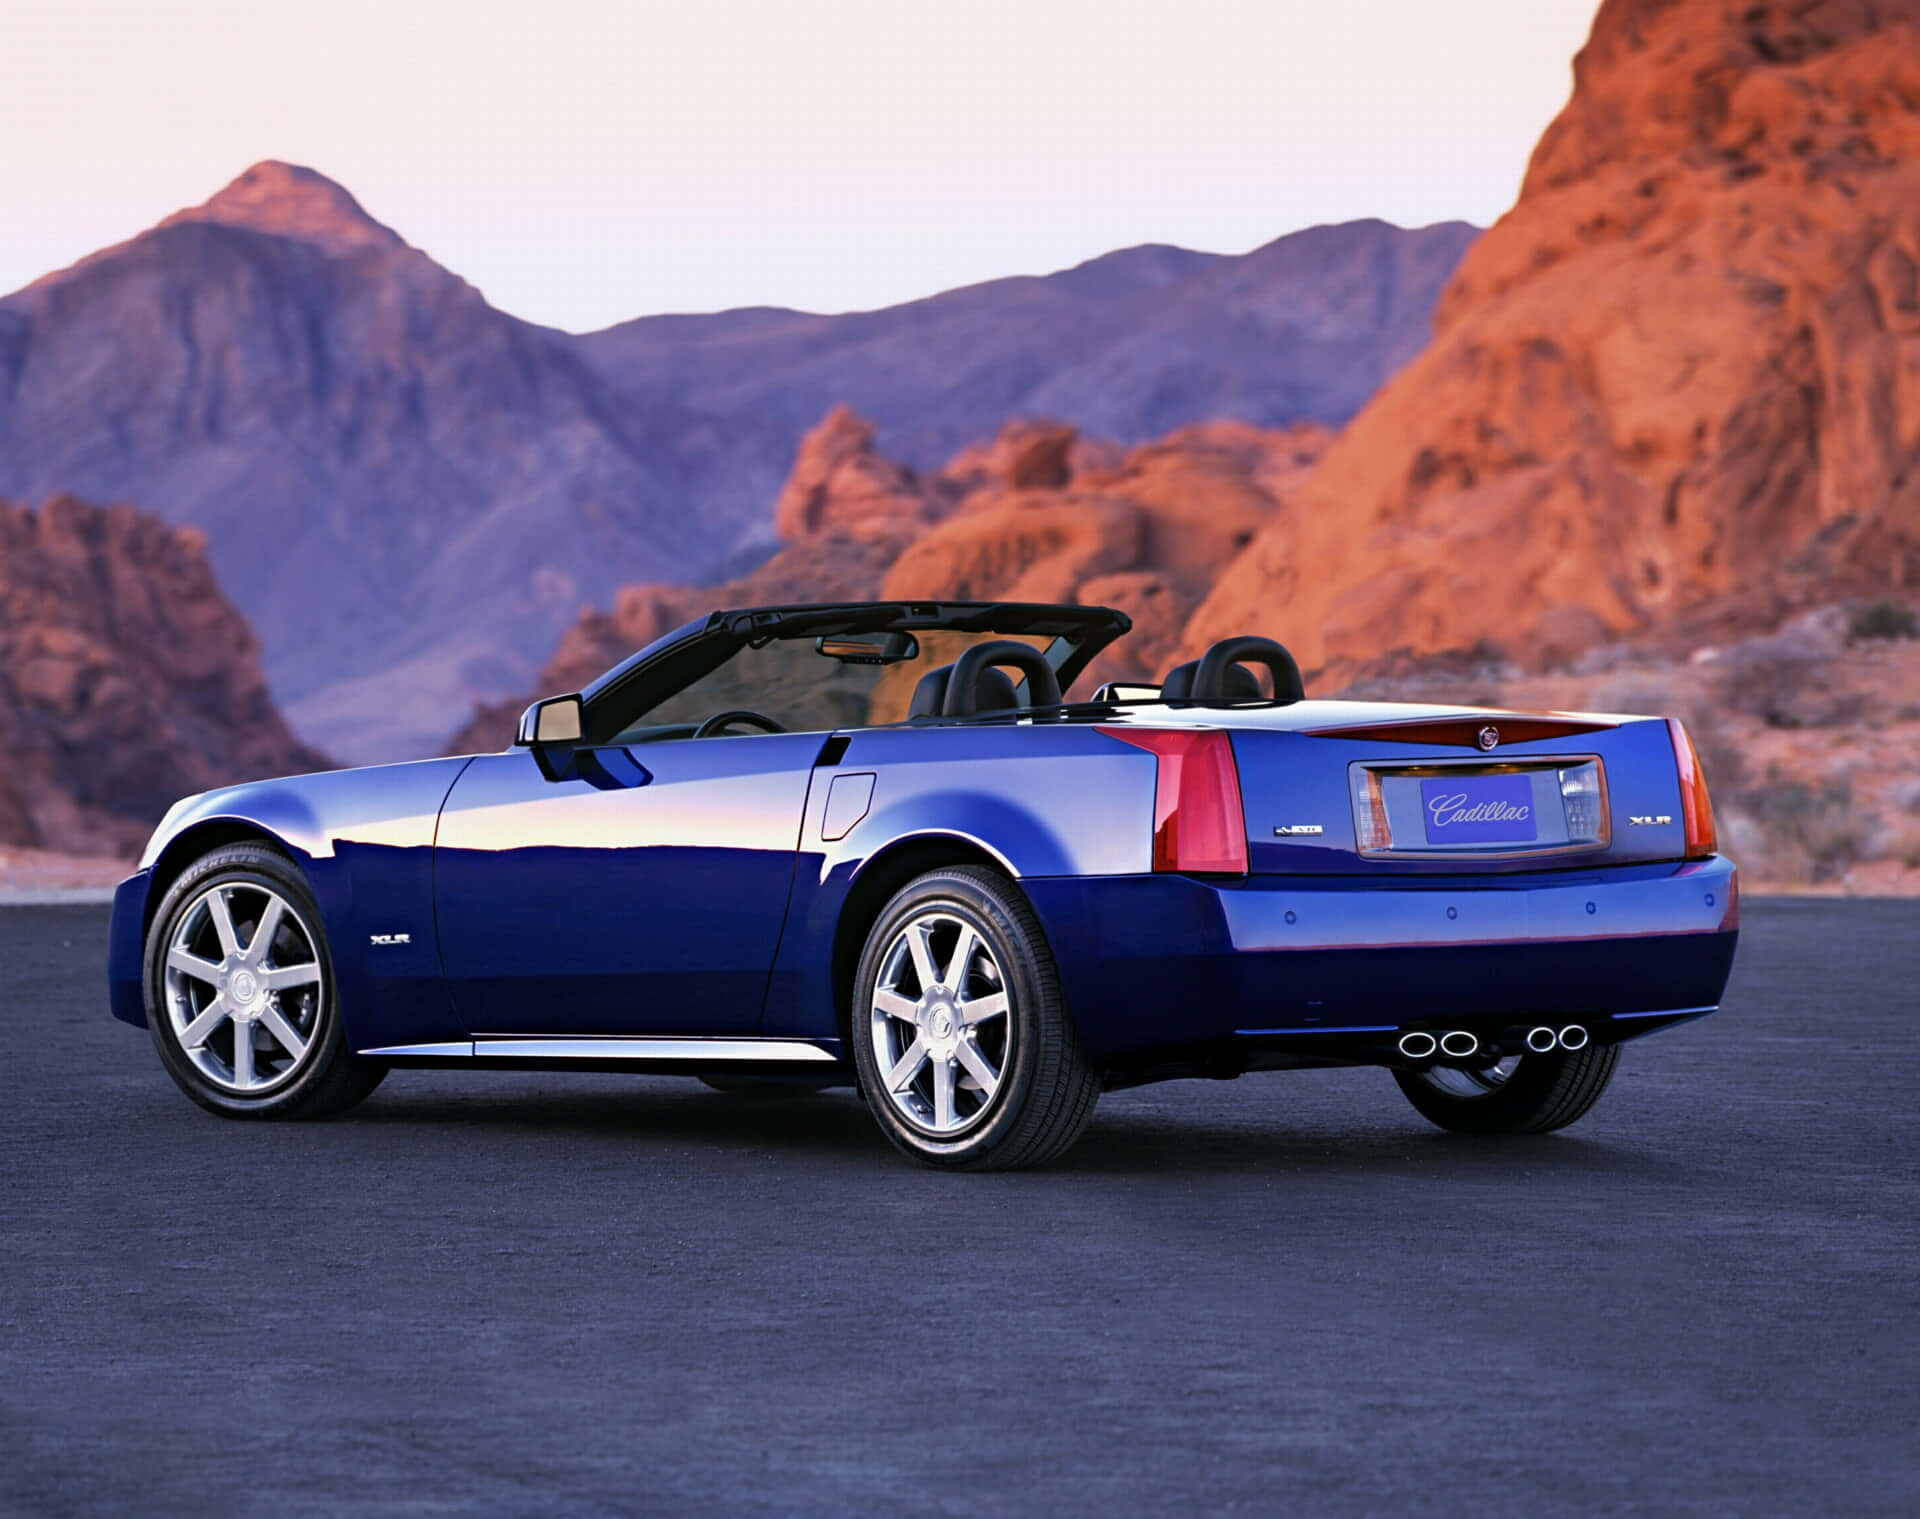 Stunning Red Cadillac XLR on a Scenic Landscape Wallpaper